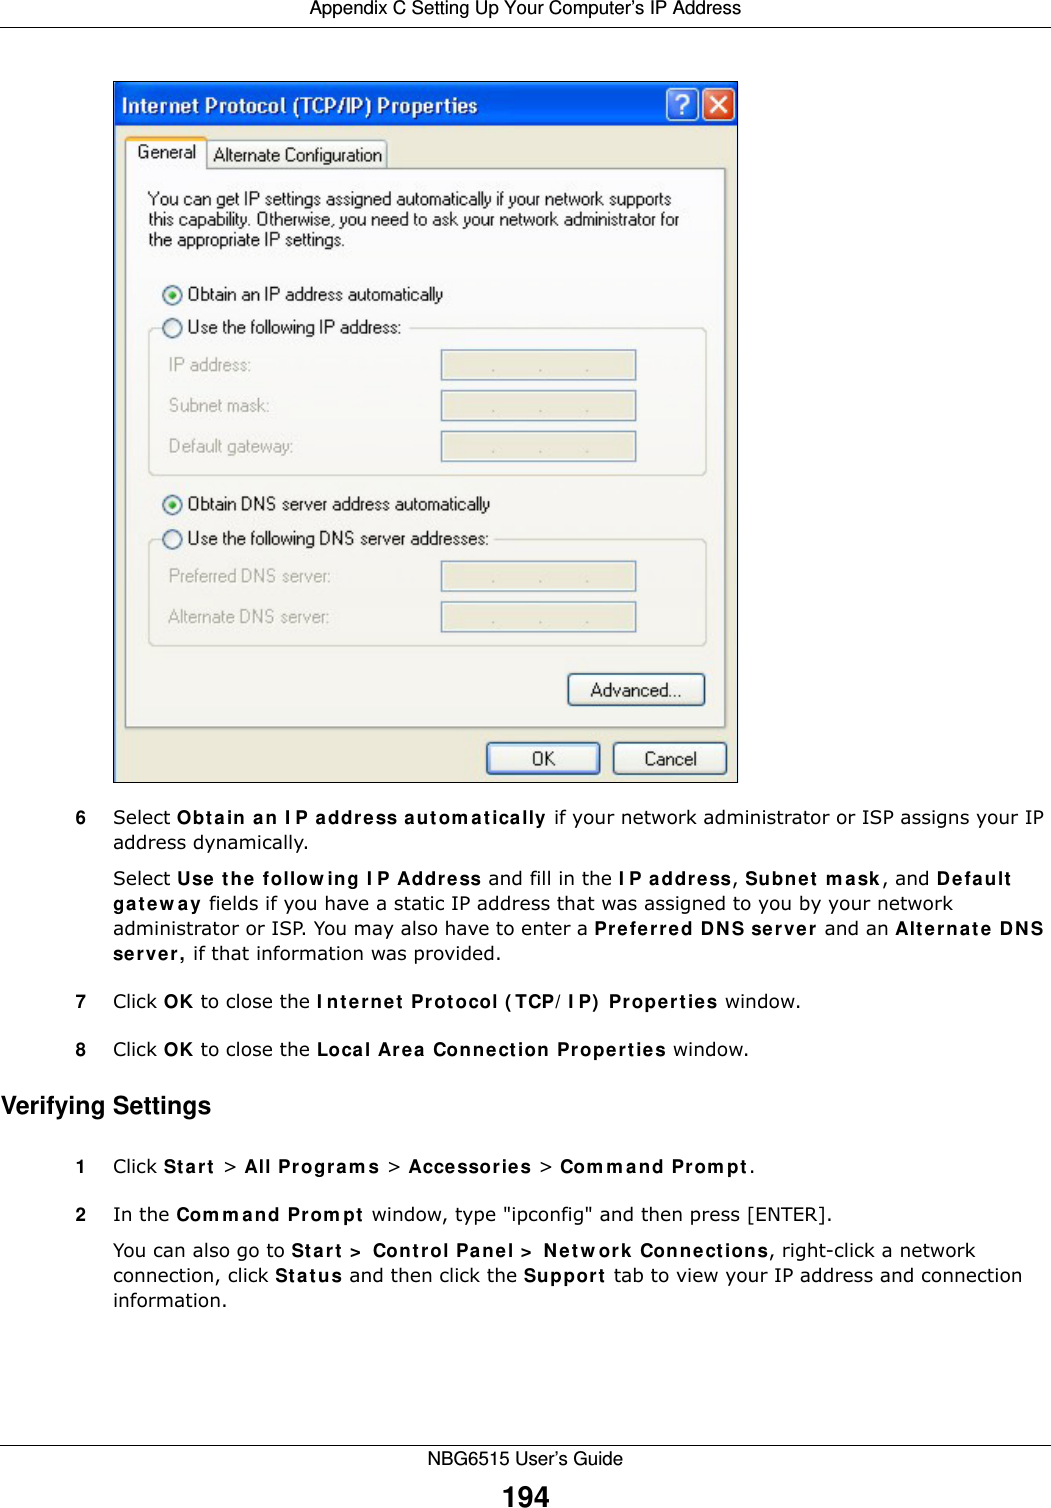 Appendix C Setting Up Your Computer’s IP AddressNBG6515 User’s Guide1946Select Obt ain  a n I P addre ss aut om at ica lly if your network administrator or ISP assigns your IP address dynamically.Select Use  t h e  follow ing I P Addre ss and fill in the I P a ddre ss, Subne t  m ask, and D e fau lt  ga t e w a y fields if you have a static IP address that was assigned to you by your network administrator or ISP. You may also have to enter a Pre fe r r e d D N S se rve r  and an Alt e rn a t e  DN S ser ver , if that information was provided.7Click OK to close the I nt erne t  Prot ocol ( TCP/ I P)  Proper t ie s window.8Click OK to close the Loca l Area  Conn ect ion Pr oper t ies window.Verifying Settings1Click St a rt  &gt; All Pr ogra m s &gt; Acce ssor ies &gt; Com m a nd Pr om pt .2In the Com m a nd Pr om pt  window, type &quot;ipconfig&quot; and then press [ENTER]. You can also go to St ar t  &gt;  Cont r ol Pa n el &gt;  N e t w ork  Conne ct ions, right-click a network connection, click St a t u s and then click the Suppor t  tab to view your IP address and connection information.